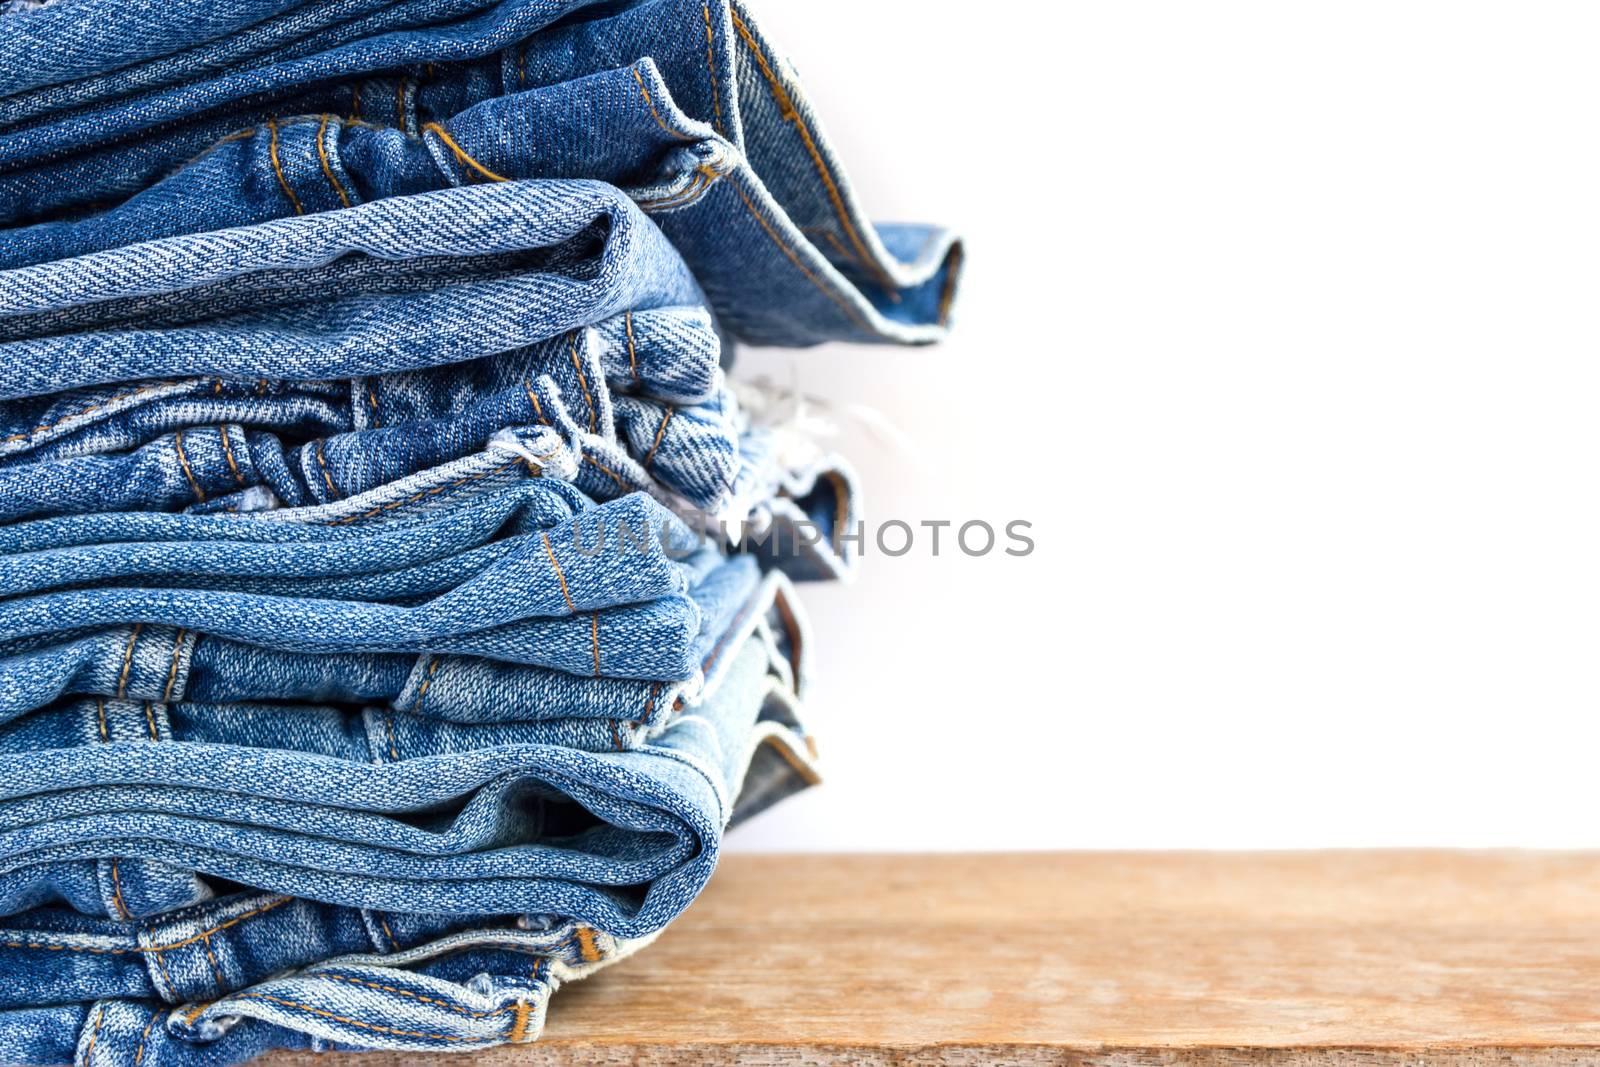 lot of denim blue jean texture is the classic indigo fashion. close-up of denim blue jeans, concept for fashion